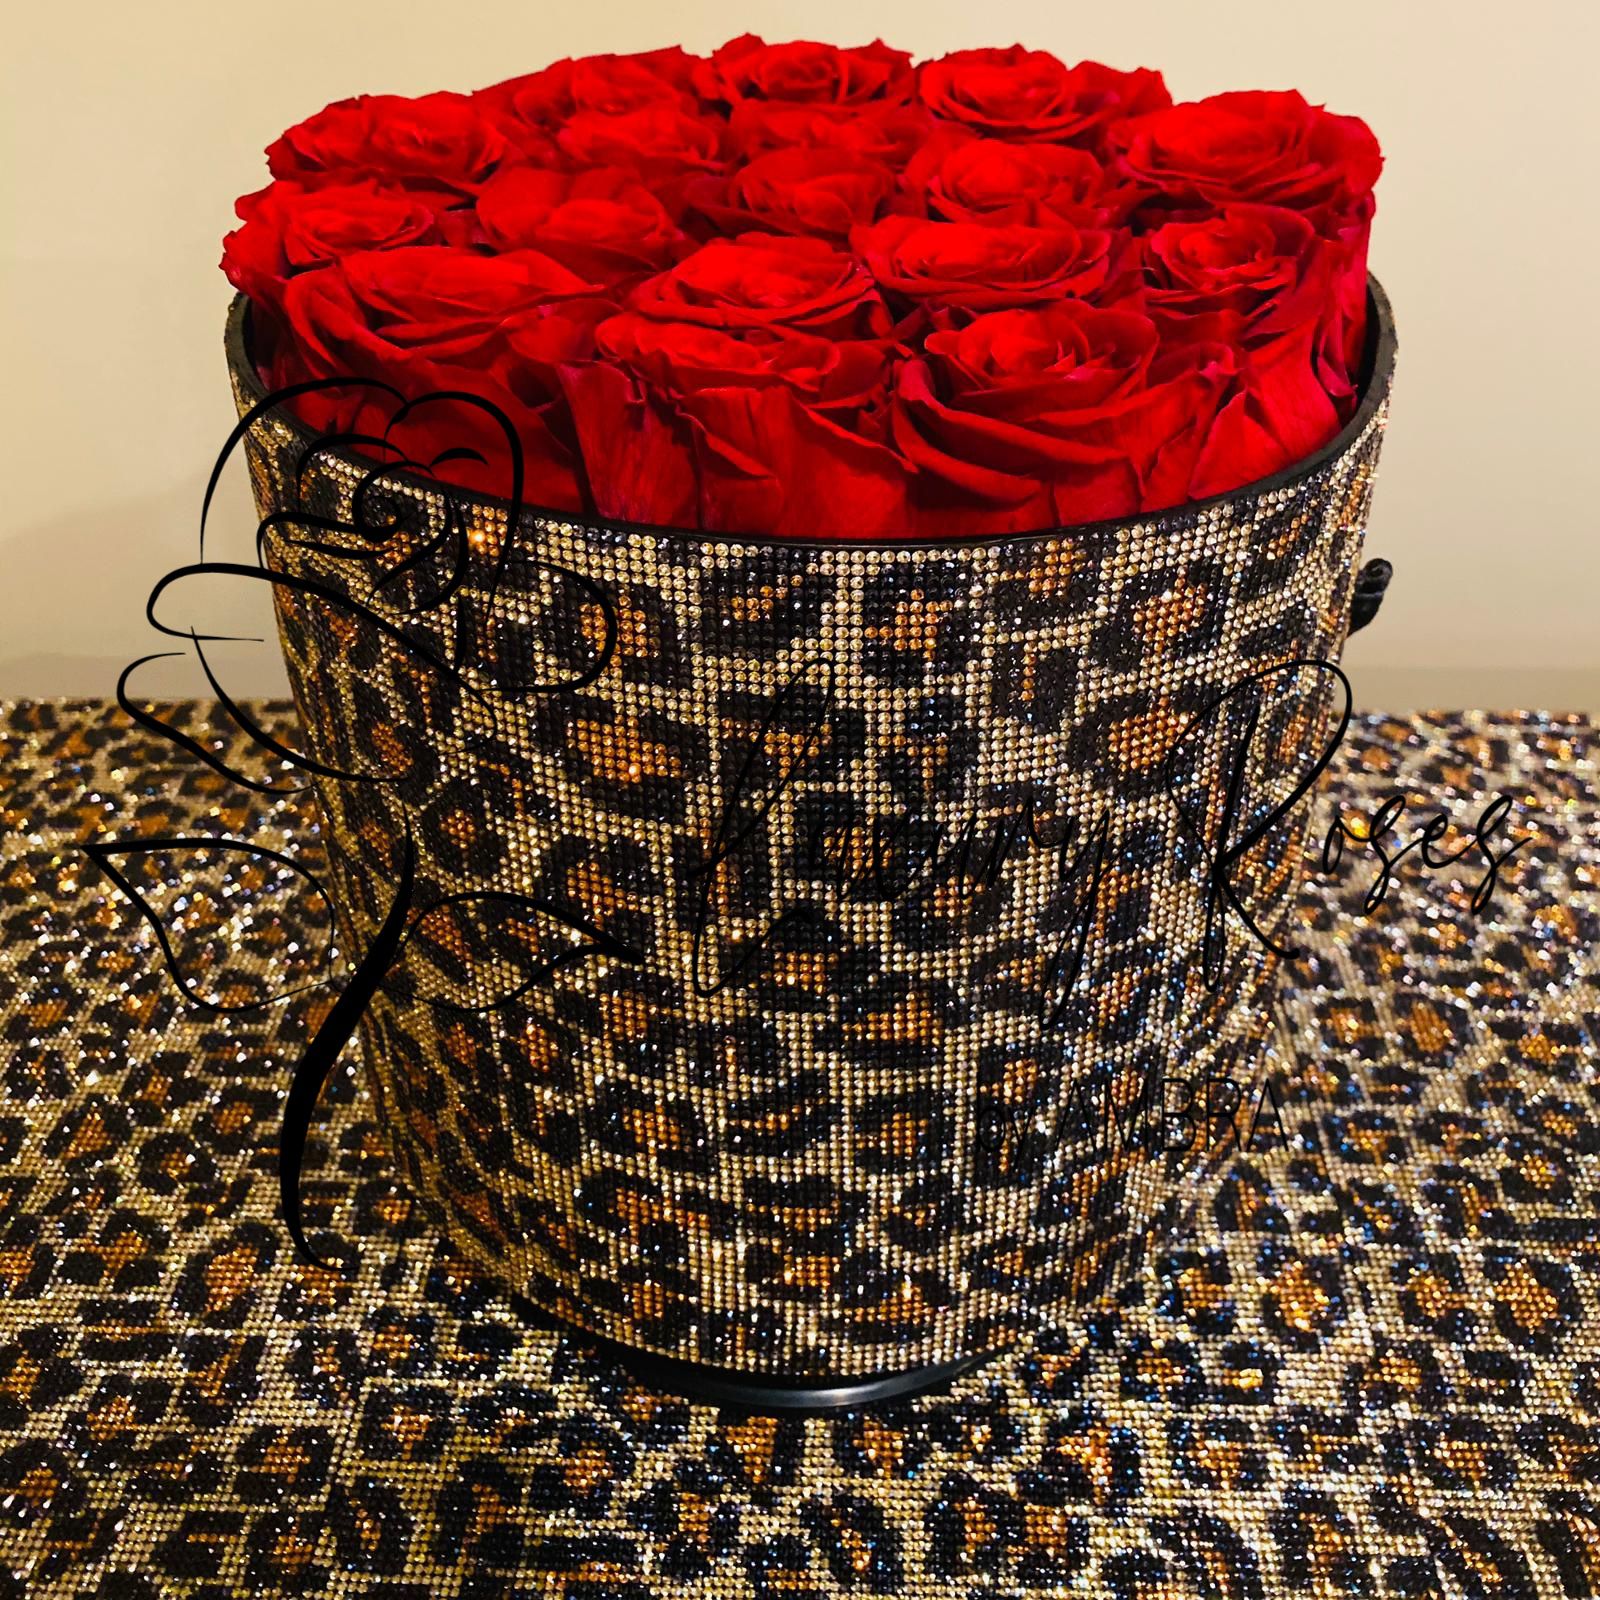 Red preserved roses Rhinestones Animal Print Leopard Eternal Box Roses Real Preserved Flowers Lasting Bouquet Bucket Anniversary Gift